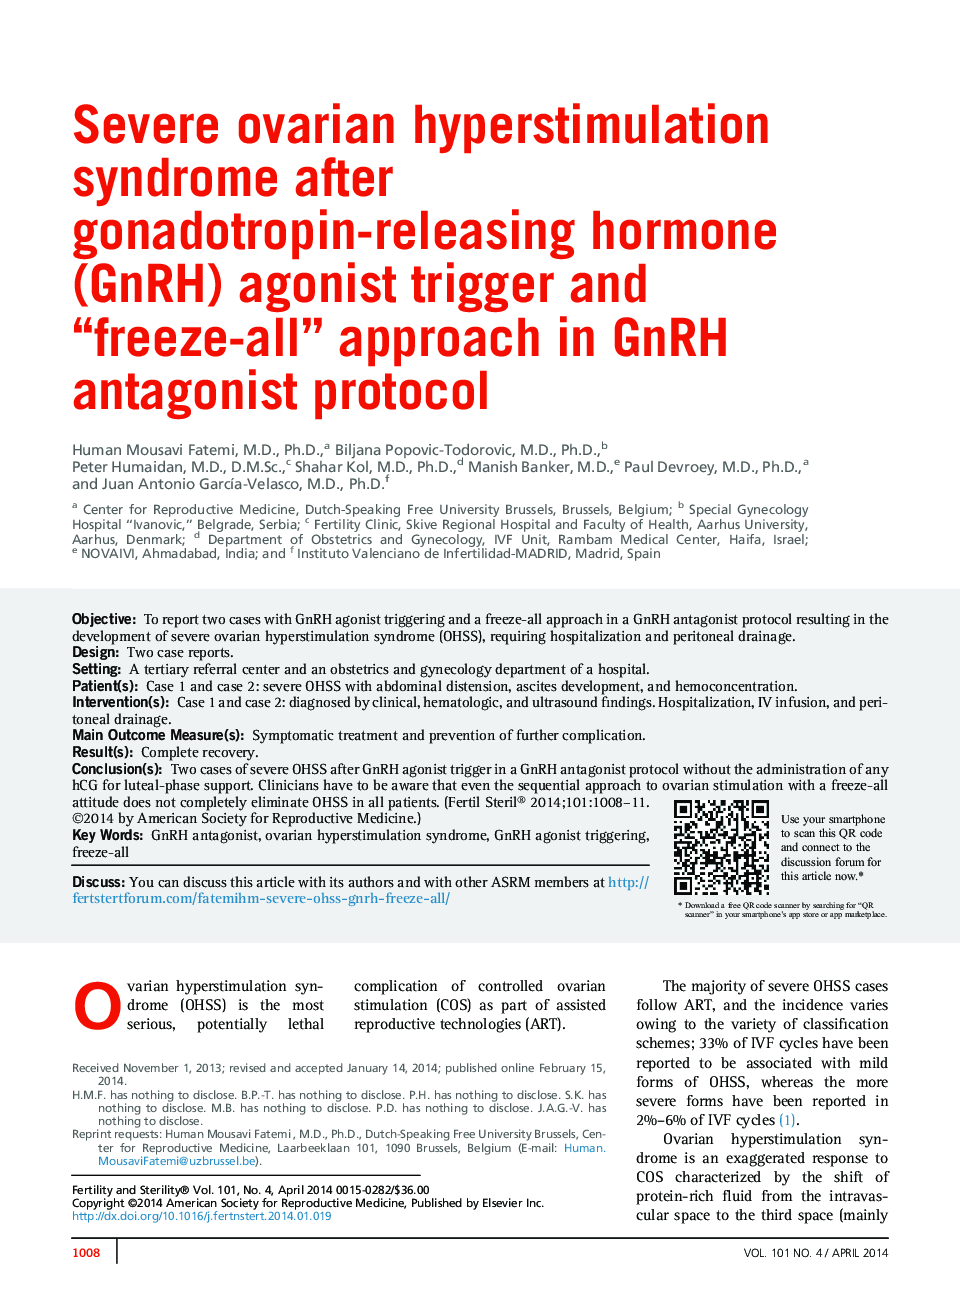 Severe ovarian hyperstimulation syndrome after gonadotropin-releasing hormone (GnRH) agonist trigger and “freeze-all” approach in GnRH antagonist protocol 